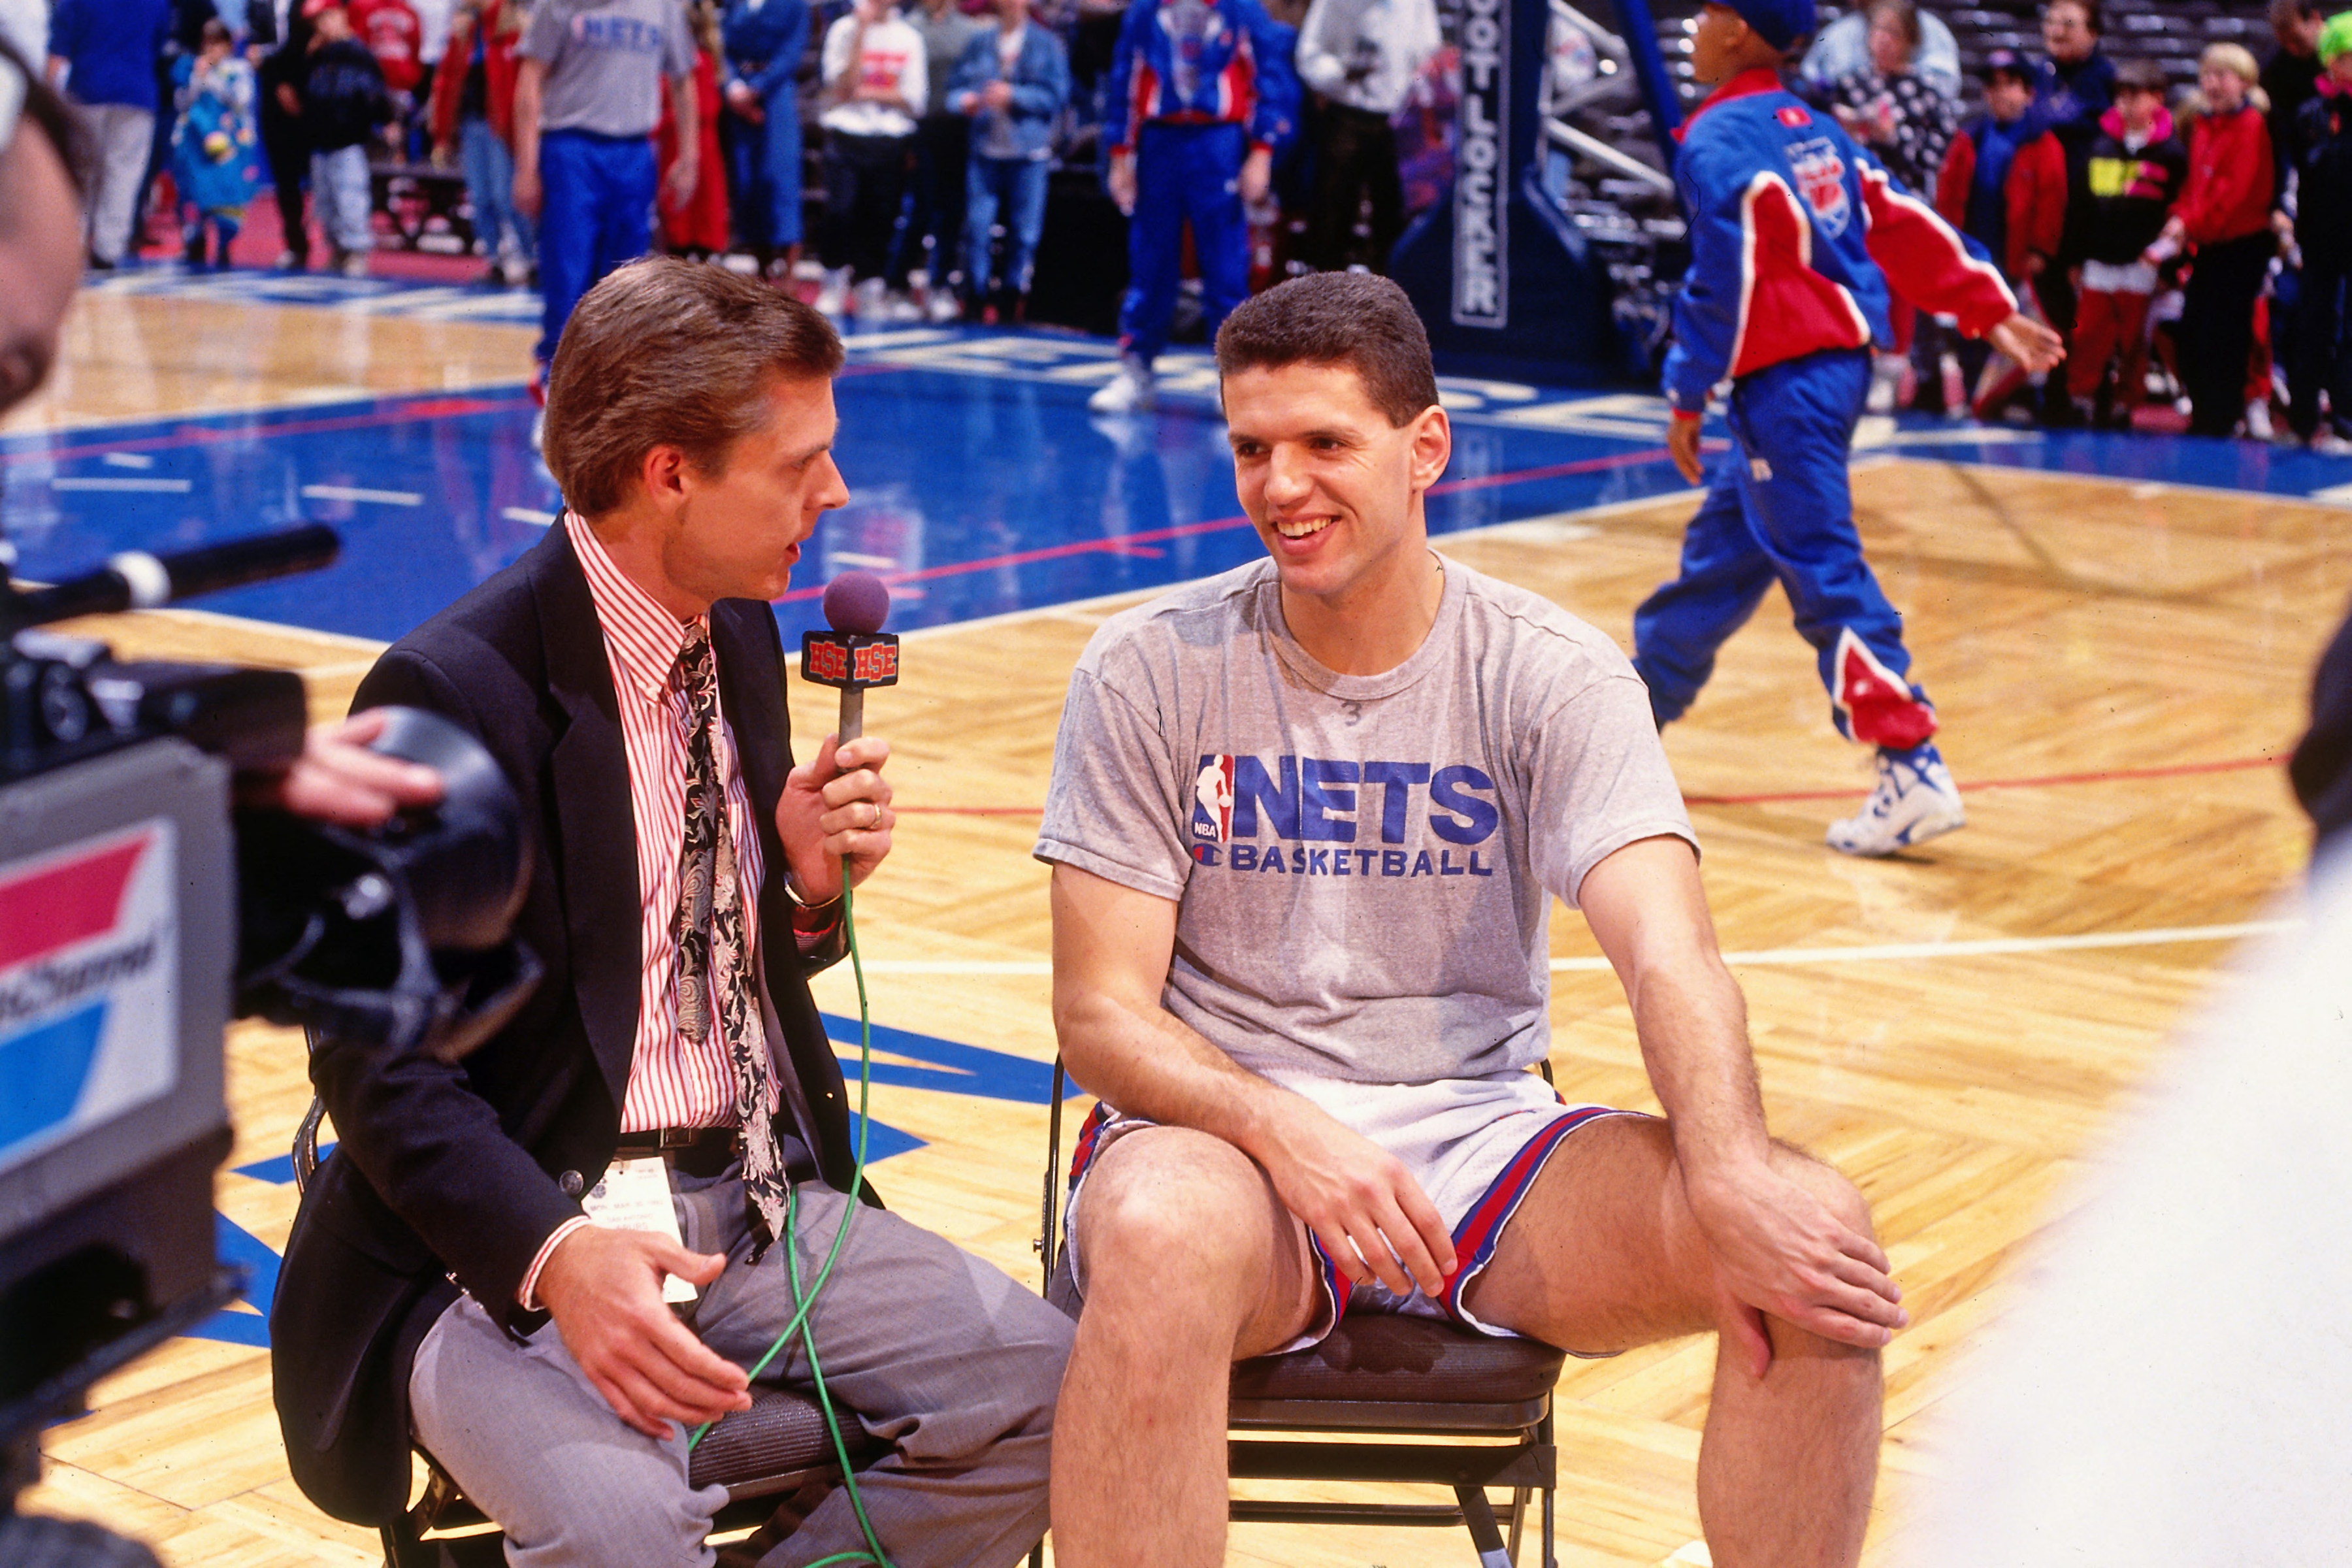 Today in history: Drazen Petrovic's jersey retired by New Jersey